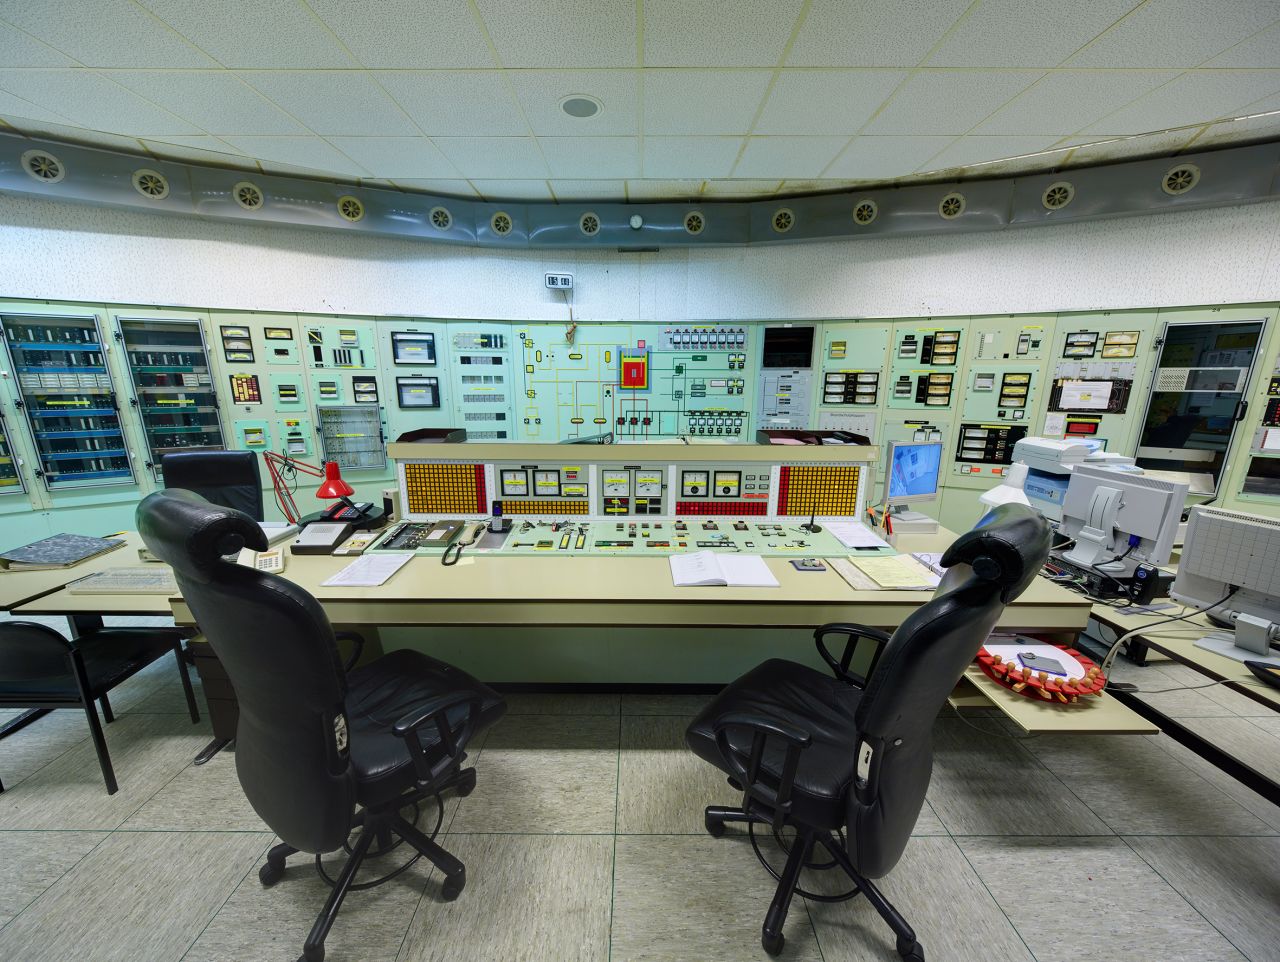 Inside the control room of the of the Jülich research reactor FRJ-2, which operated from 1962 to 2006.